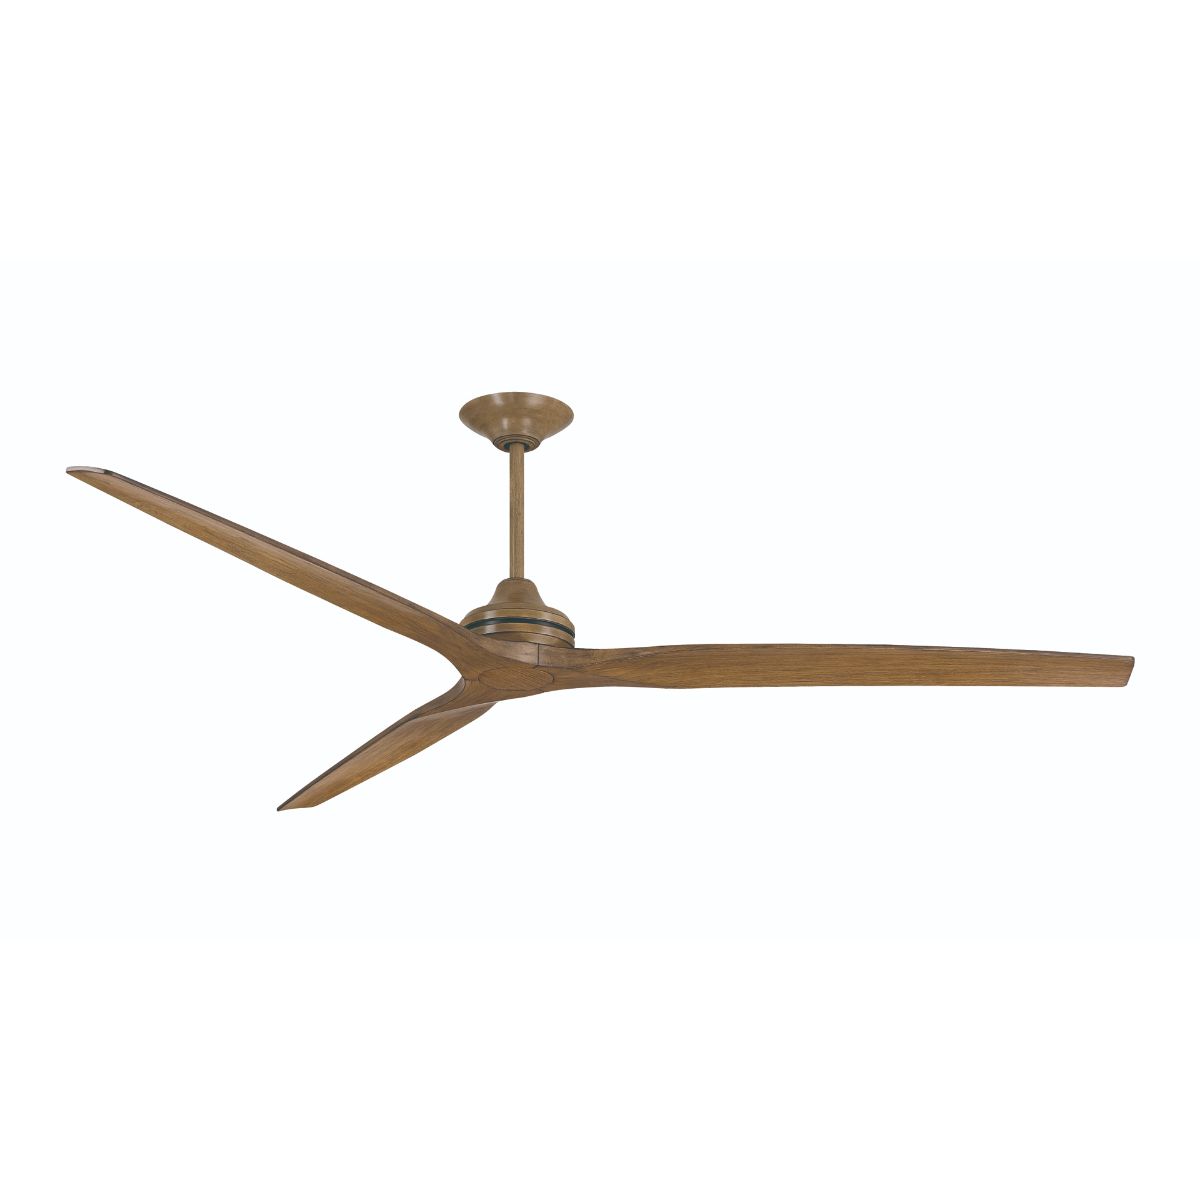 Spitfire DC Outdoor Ceiling Fan Motor With Remote, Driftwood Finish, Set of 3 Blades Sold Separately